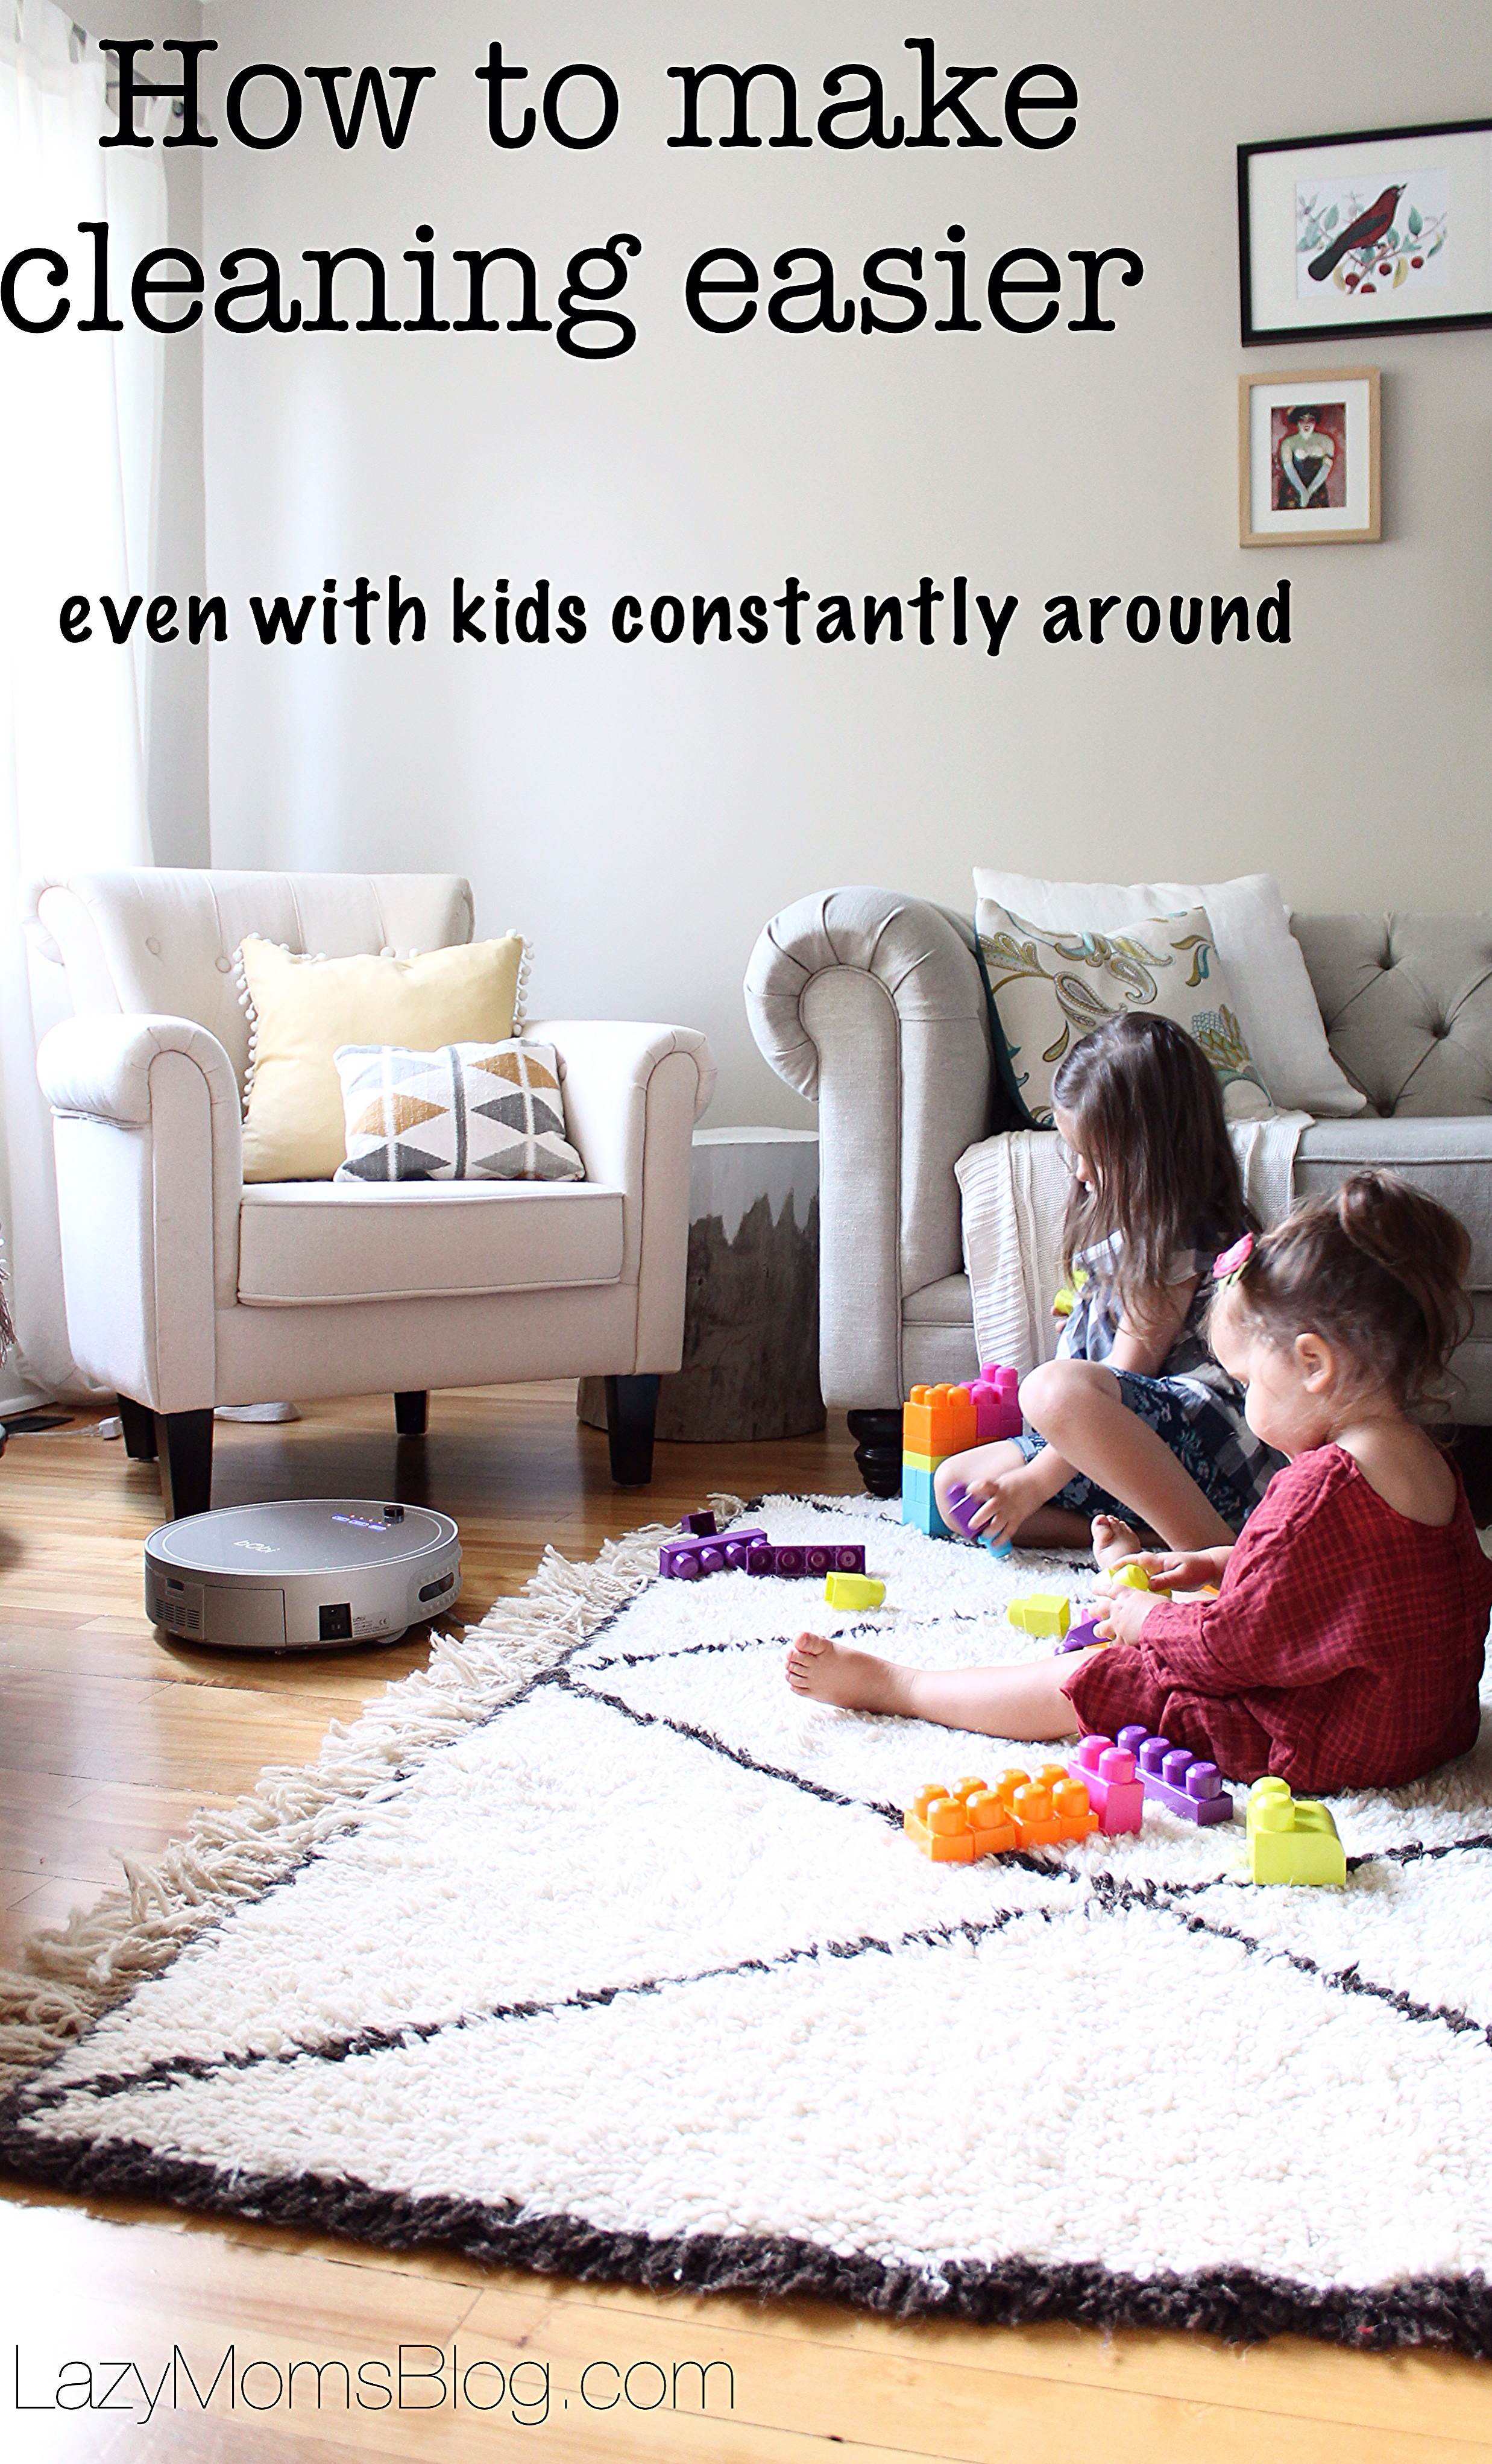 how to make cleaning with kids easier, even if they aways make mess, and even when you don't feel like cleaning all the time! 